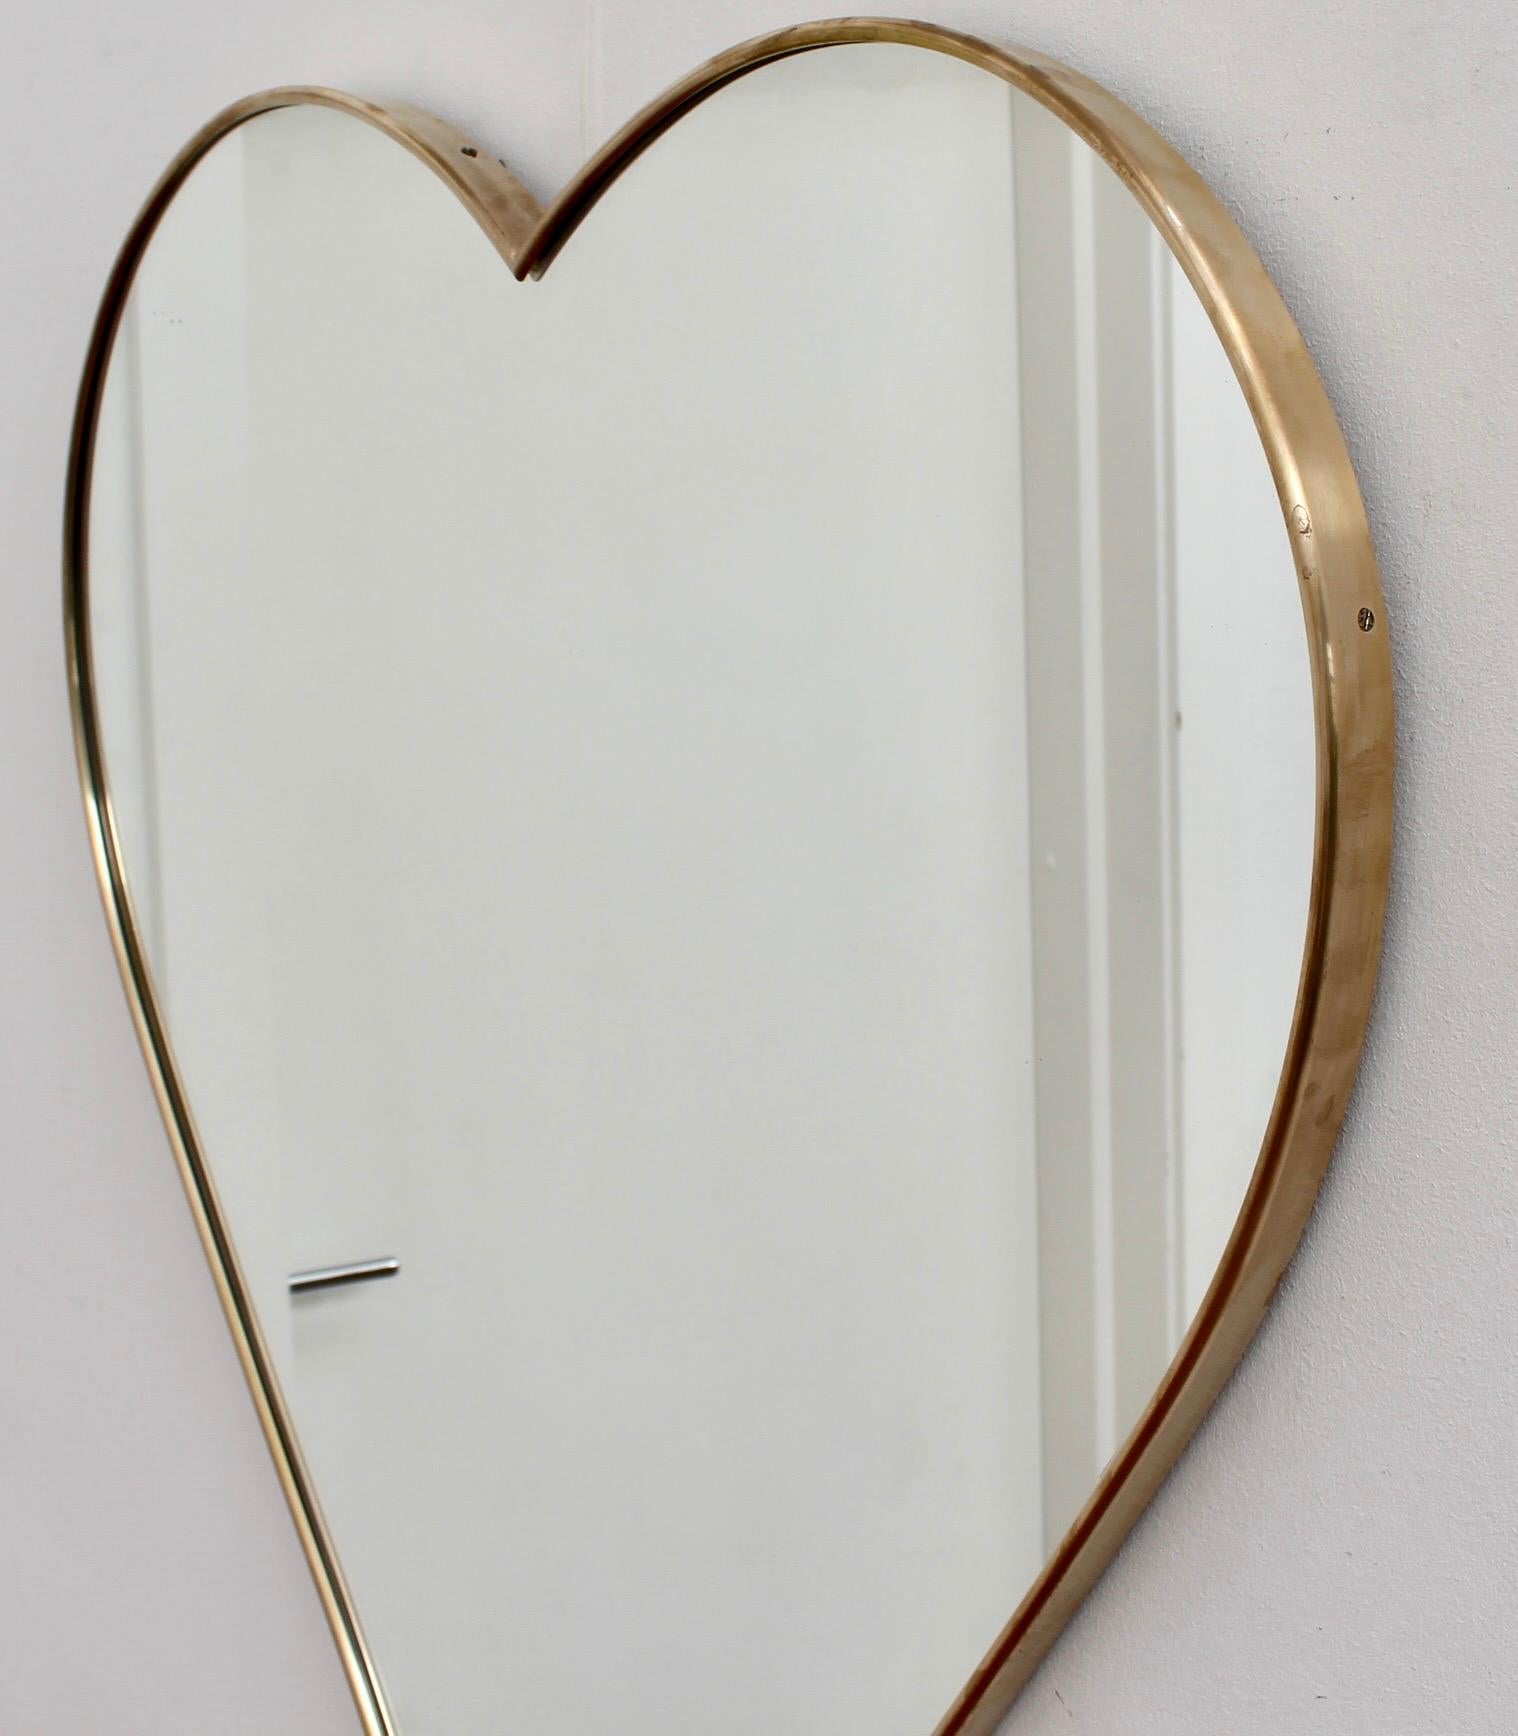 Pair of Vintage Italian Heart-Shaped Wall Mirrors with Brass Frames, c. 1960s 4